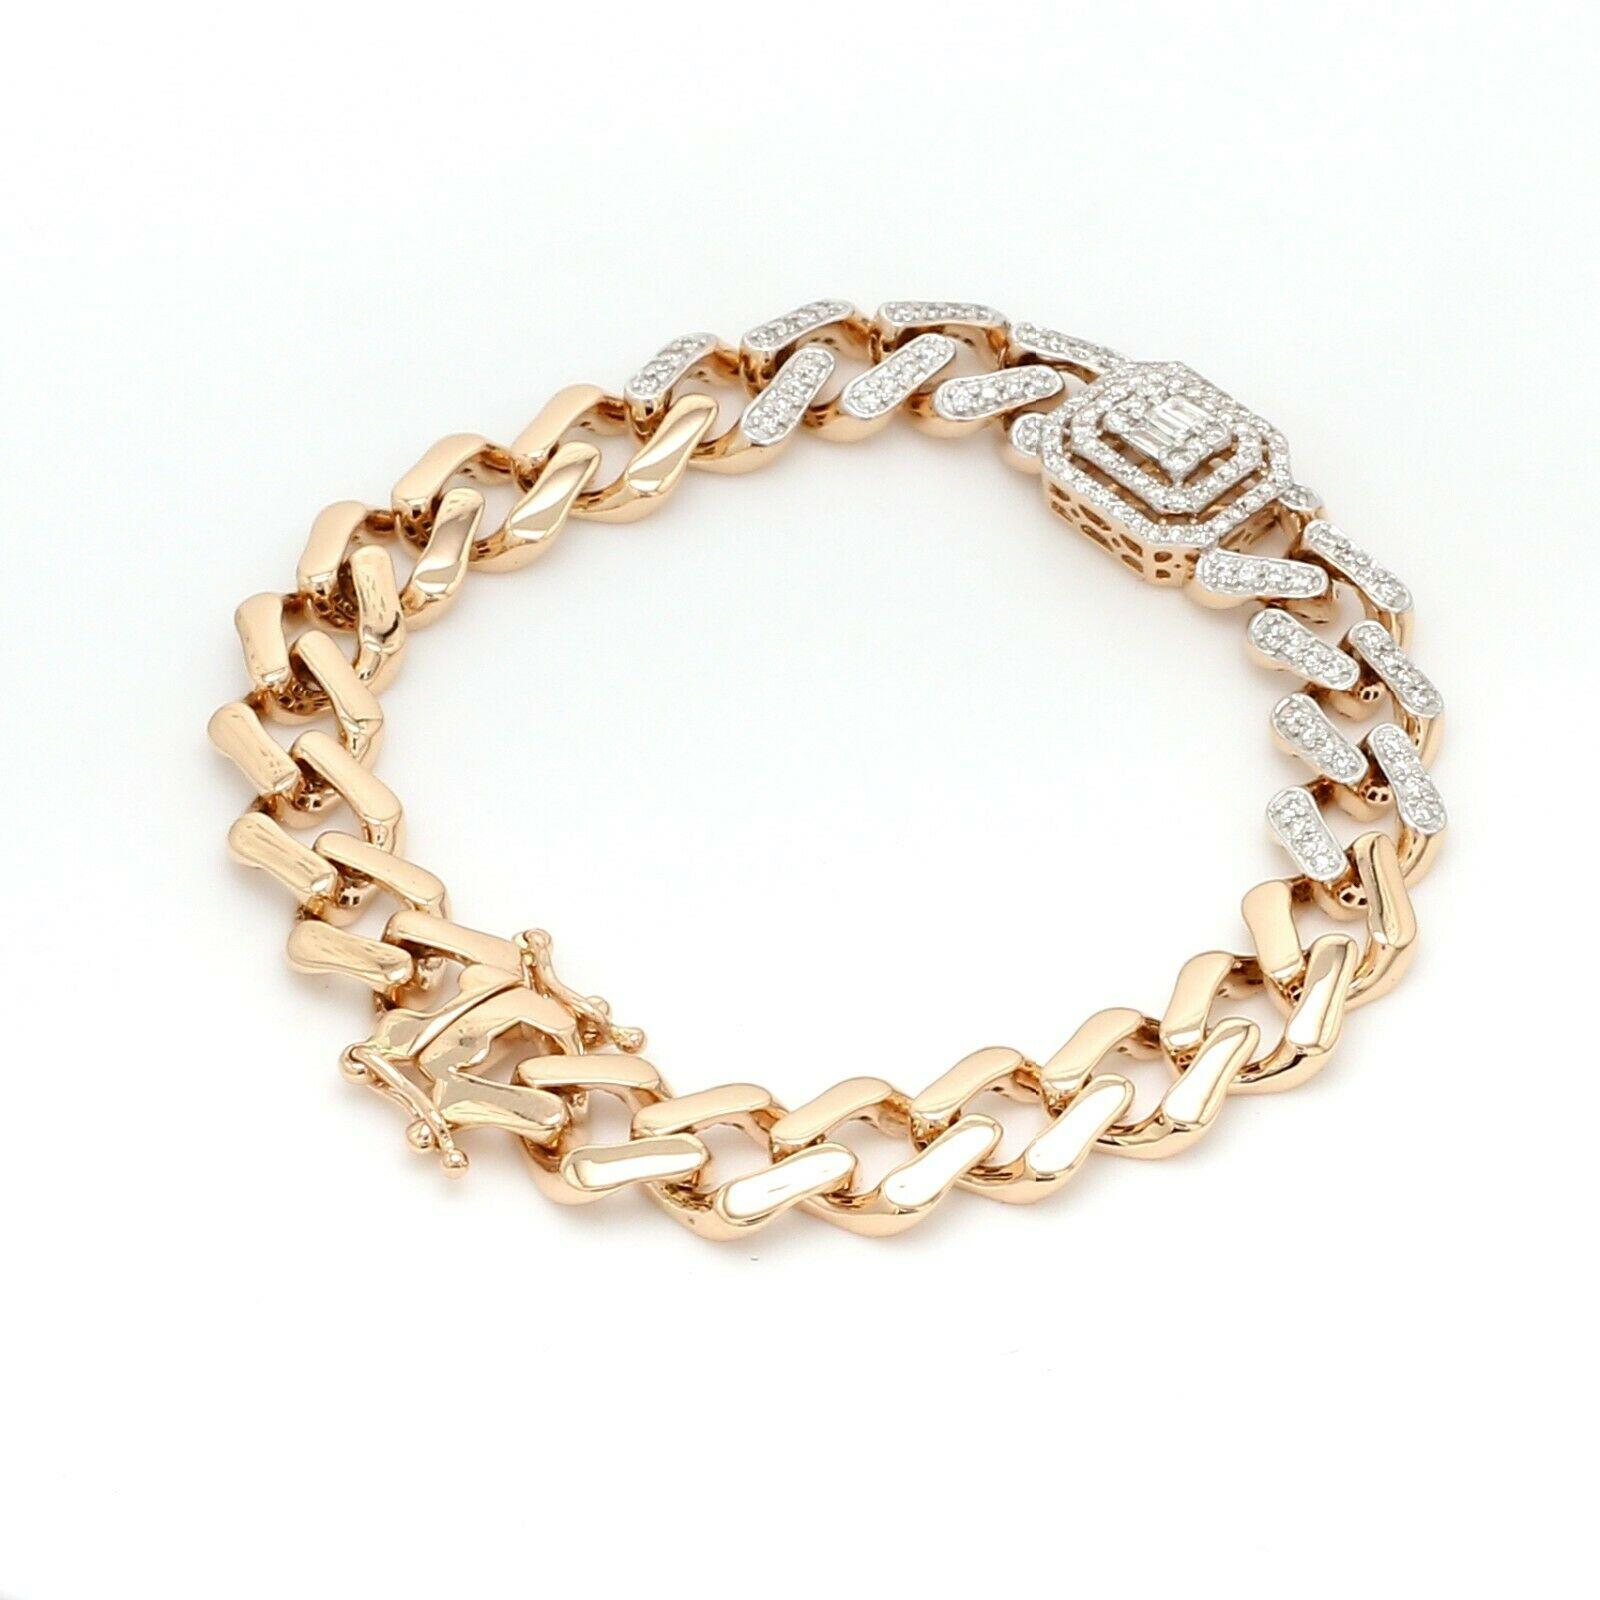 Cast from 18-karat rose gold, this link bracelet is hand set with .70 carats of sparkling diamonds. Available in yellow, rose and white gold. Bracelet Size 6.25 Inches

FOLLOW MEGHNA JEWELS storefront to view the latest collection & exclusive